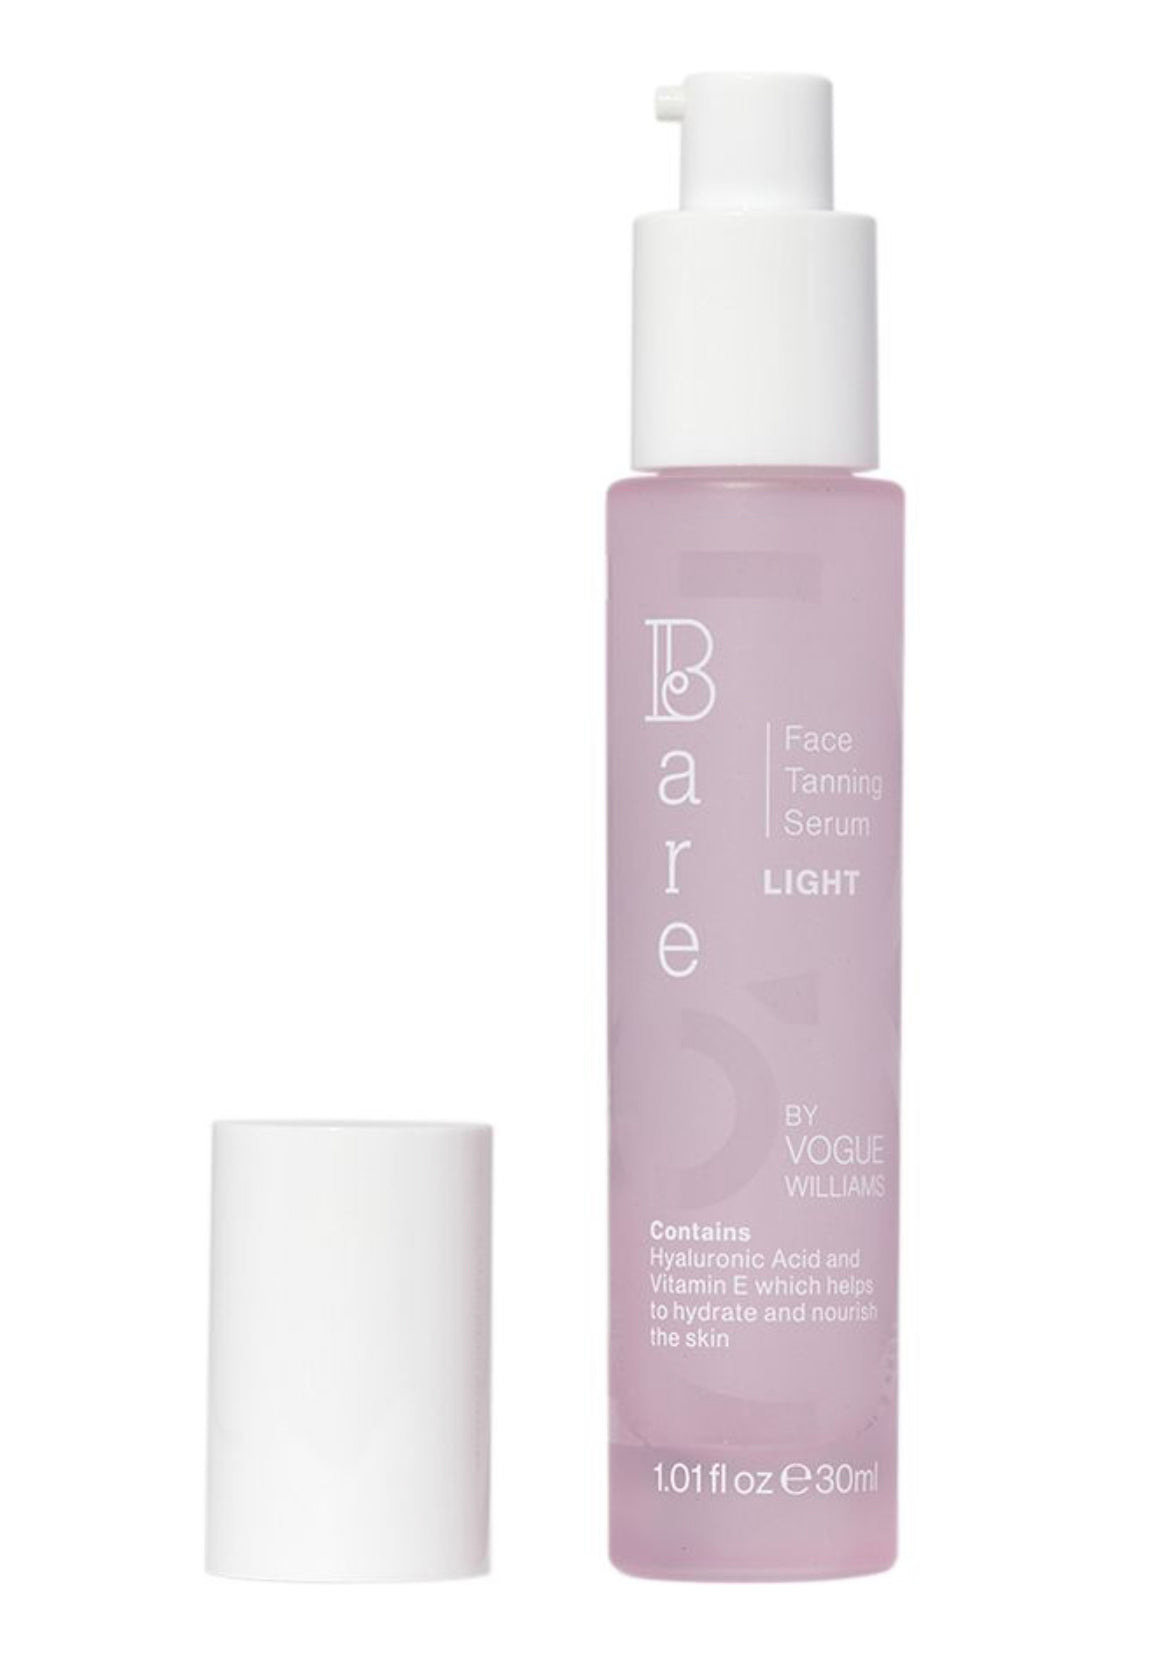 Bare By Vogue Facial Tanning Serum - Give Us Beauty